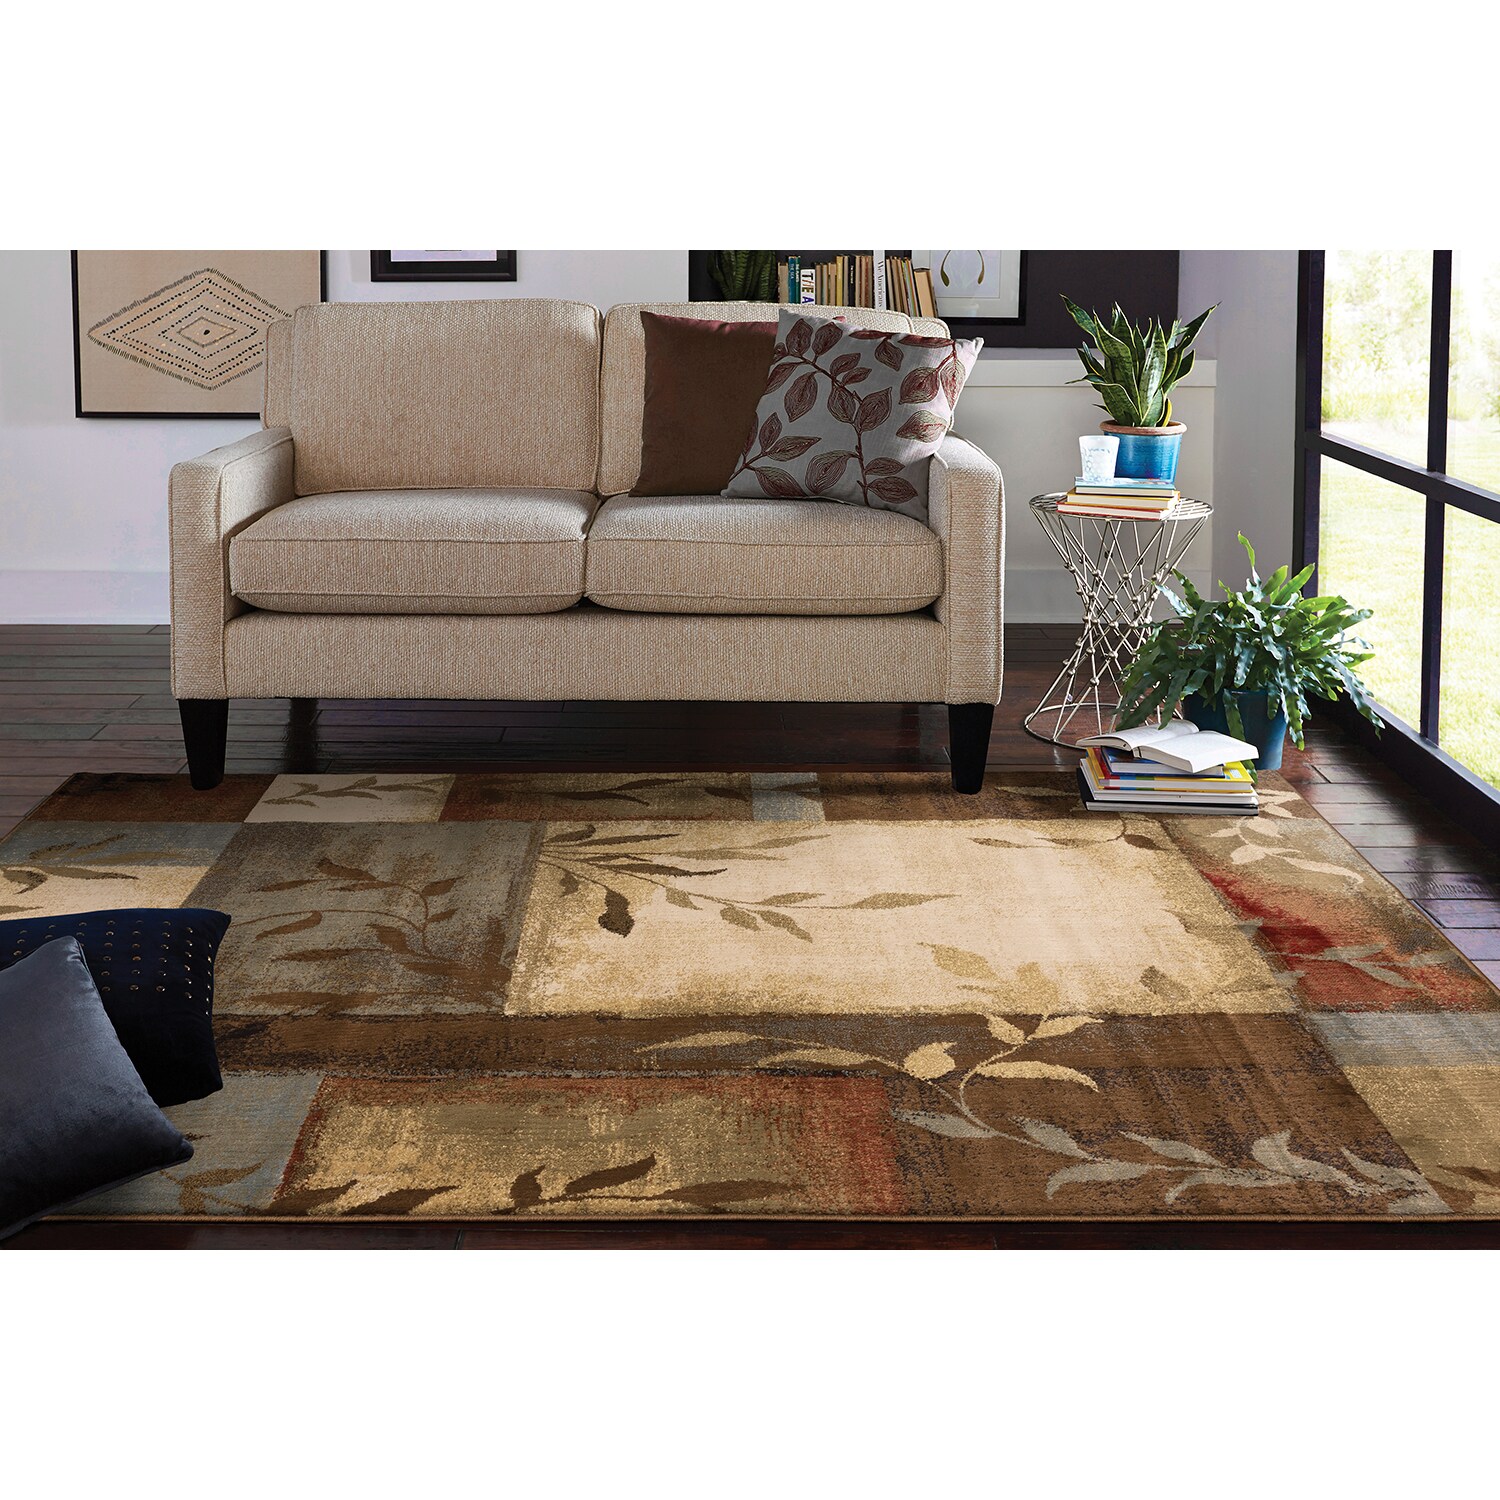 for Living Grey Maples Rugs Vintage Patchwork Distressed 5 x 7 Non Slip Large Rug Bedroom and Dining Room 5 ft x 7 ft Made in USA